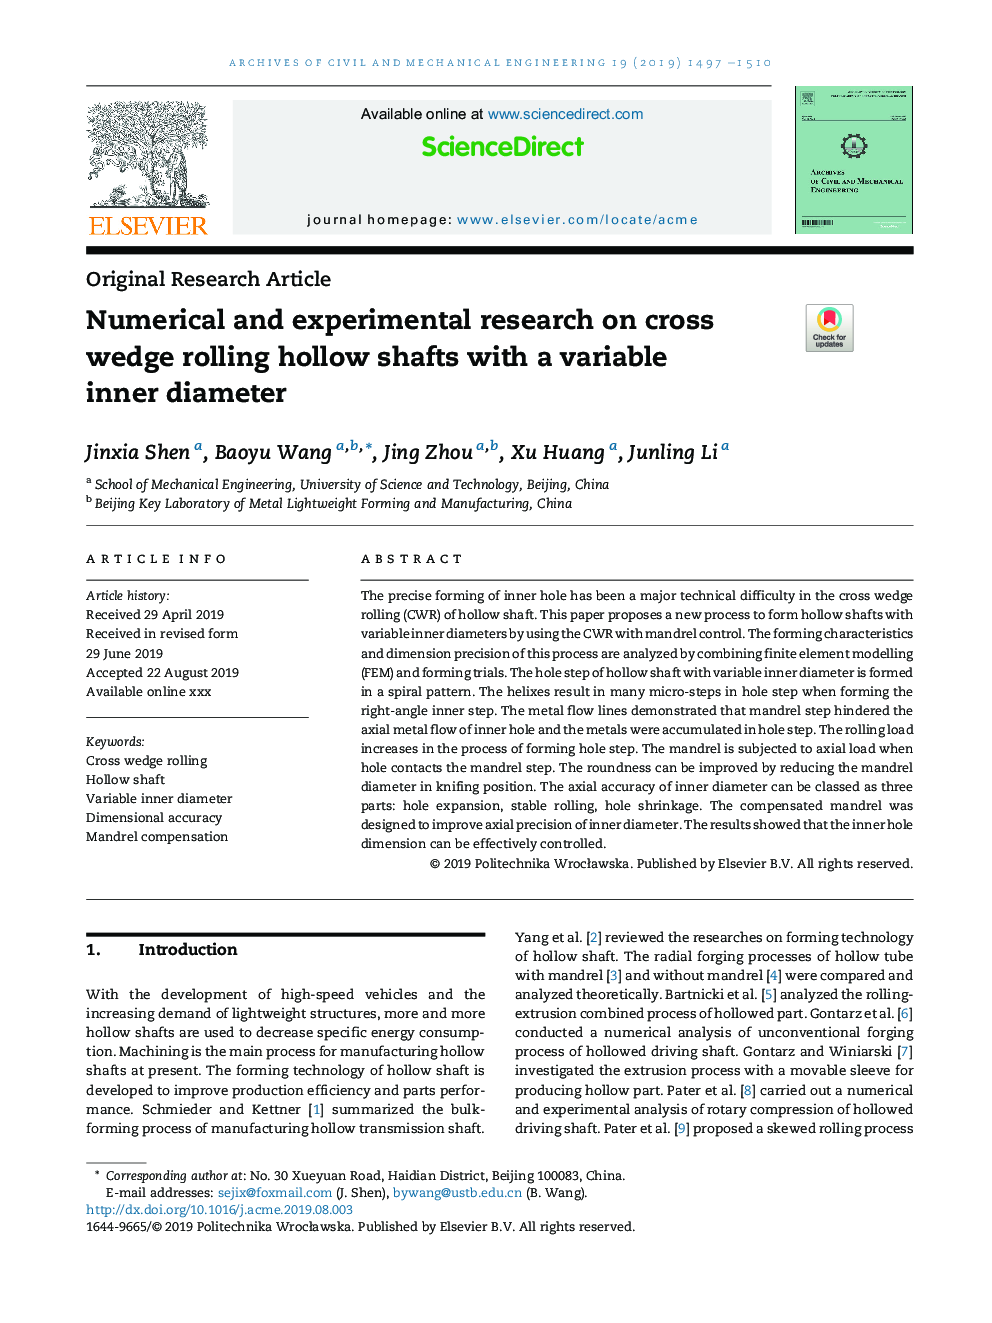 Numerical and experimental research on cross wedge rolling hollow shafts with a variable inner diameter